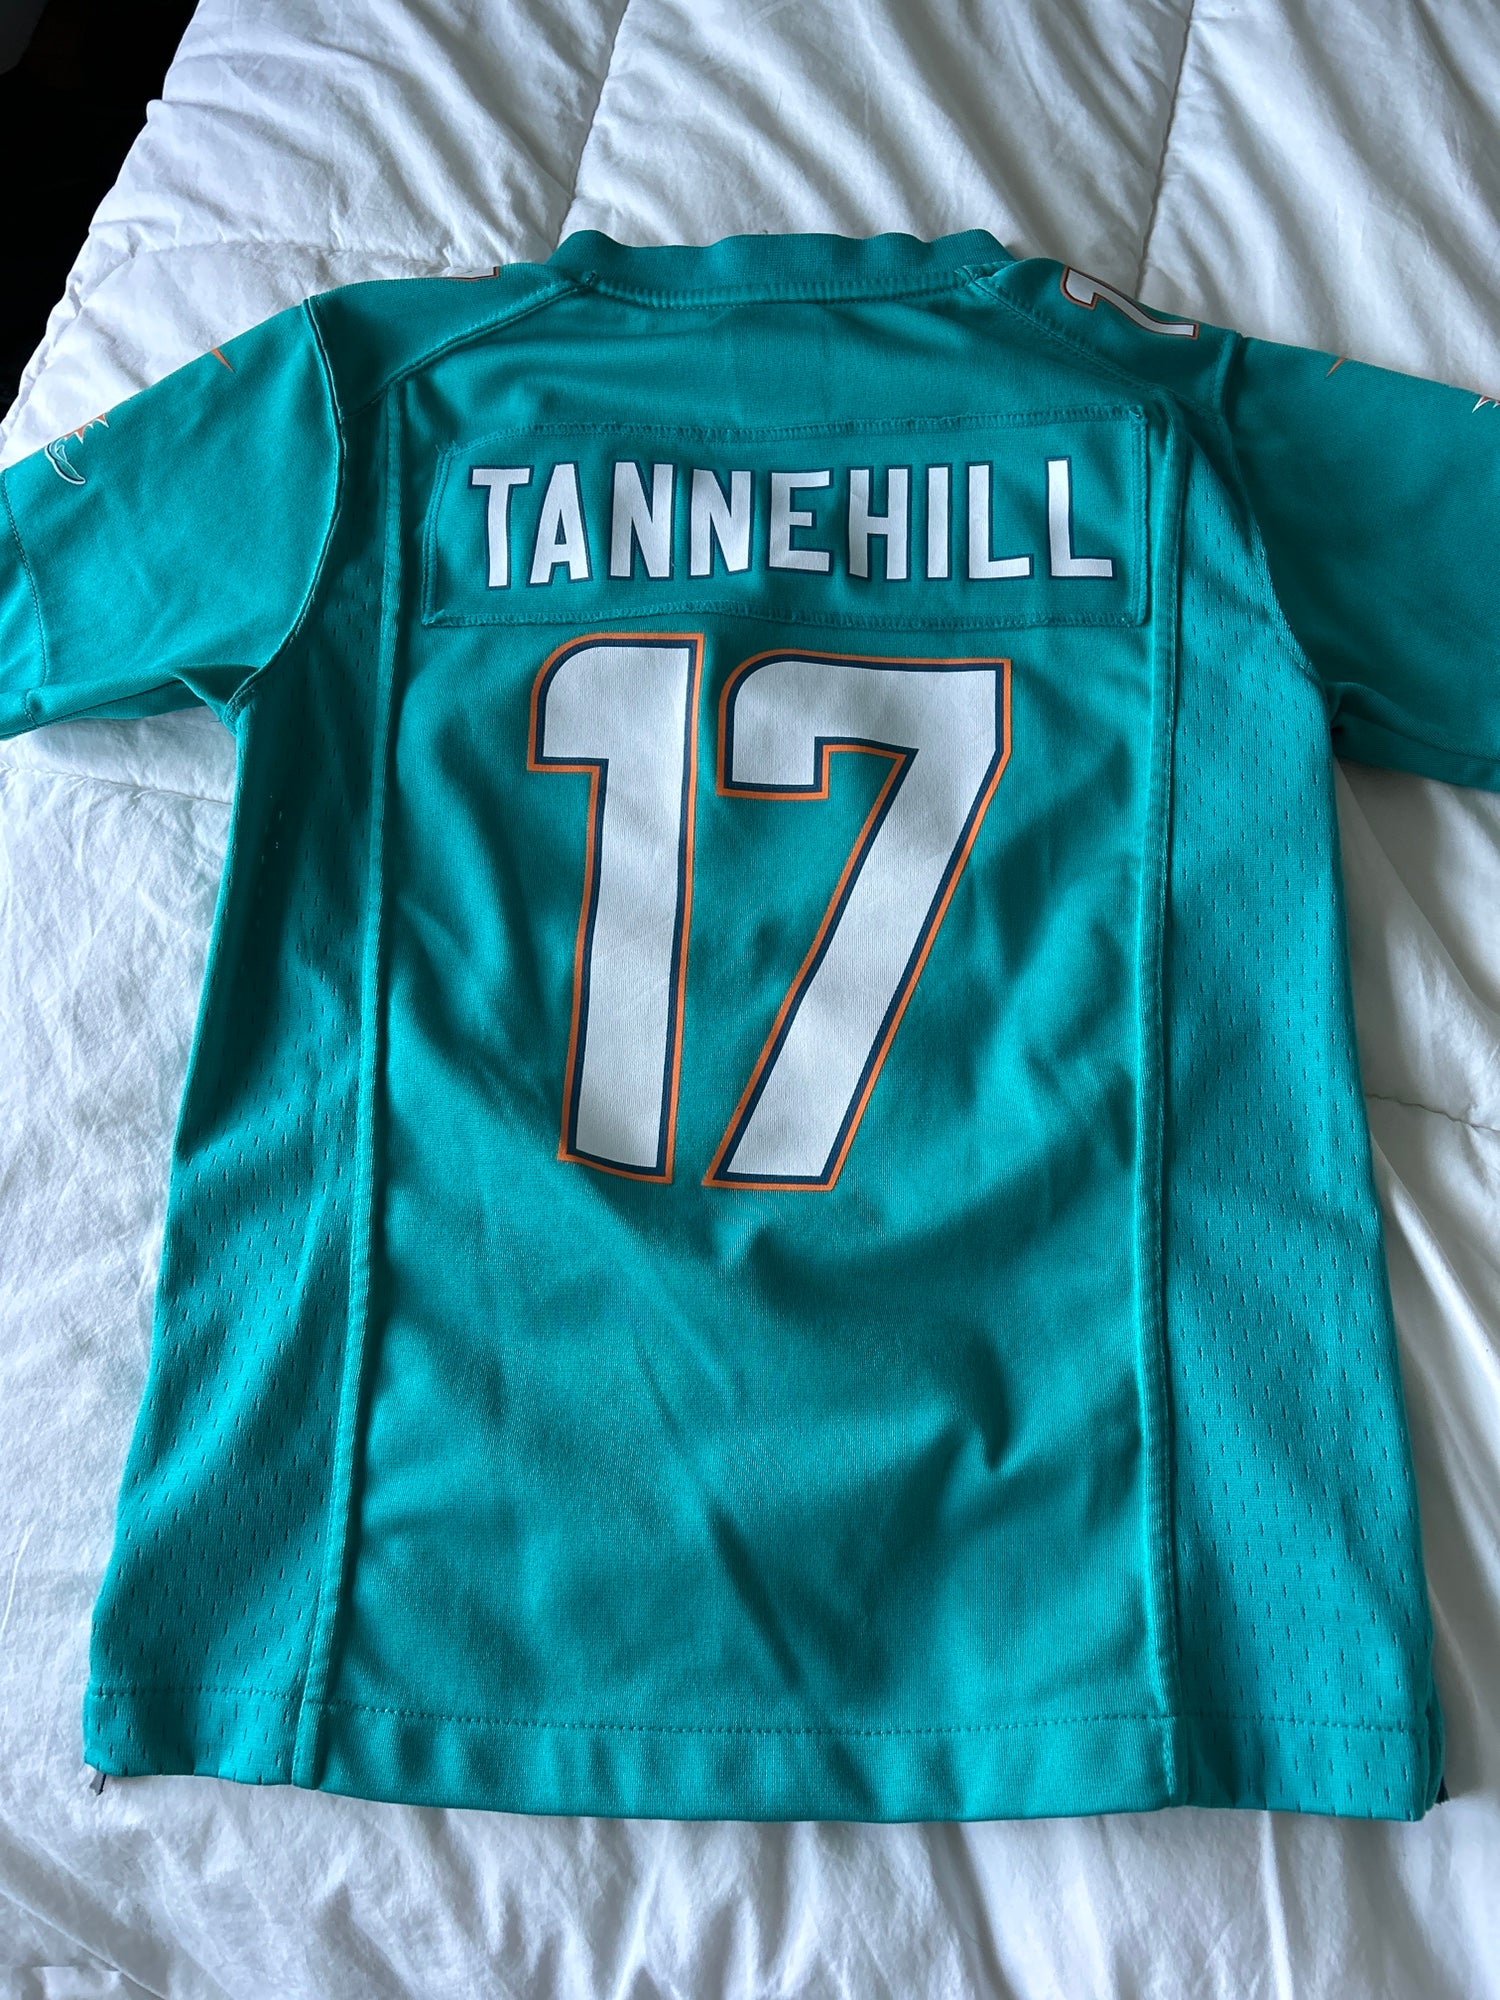 Nfl youth jersey Dolphins